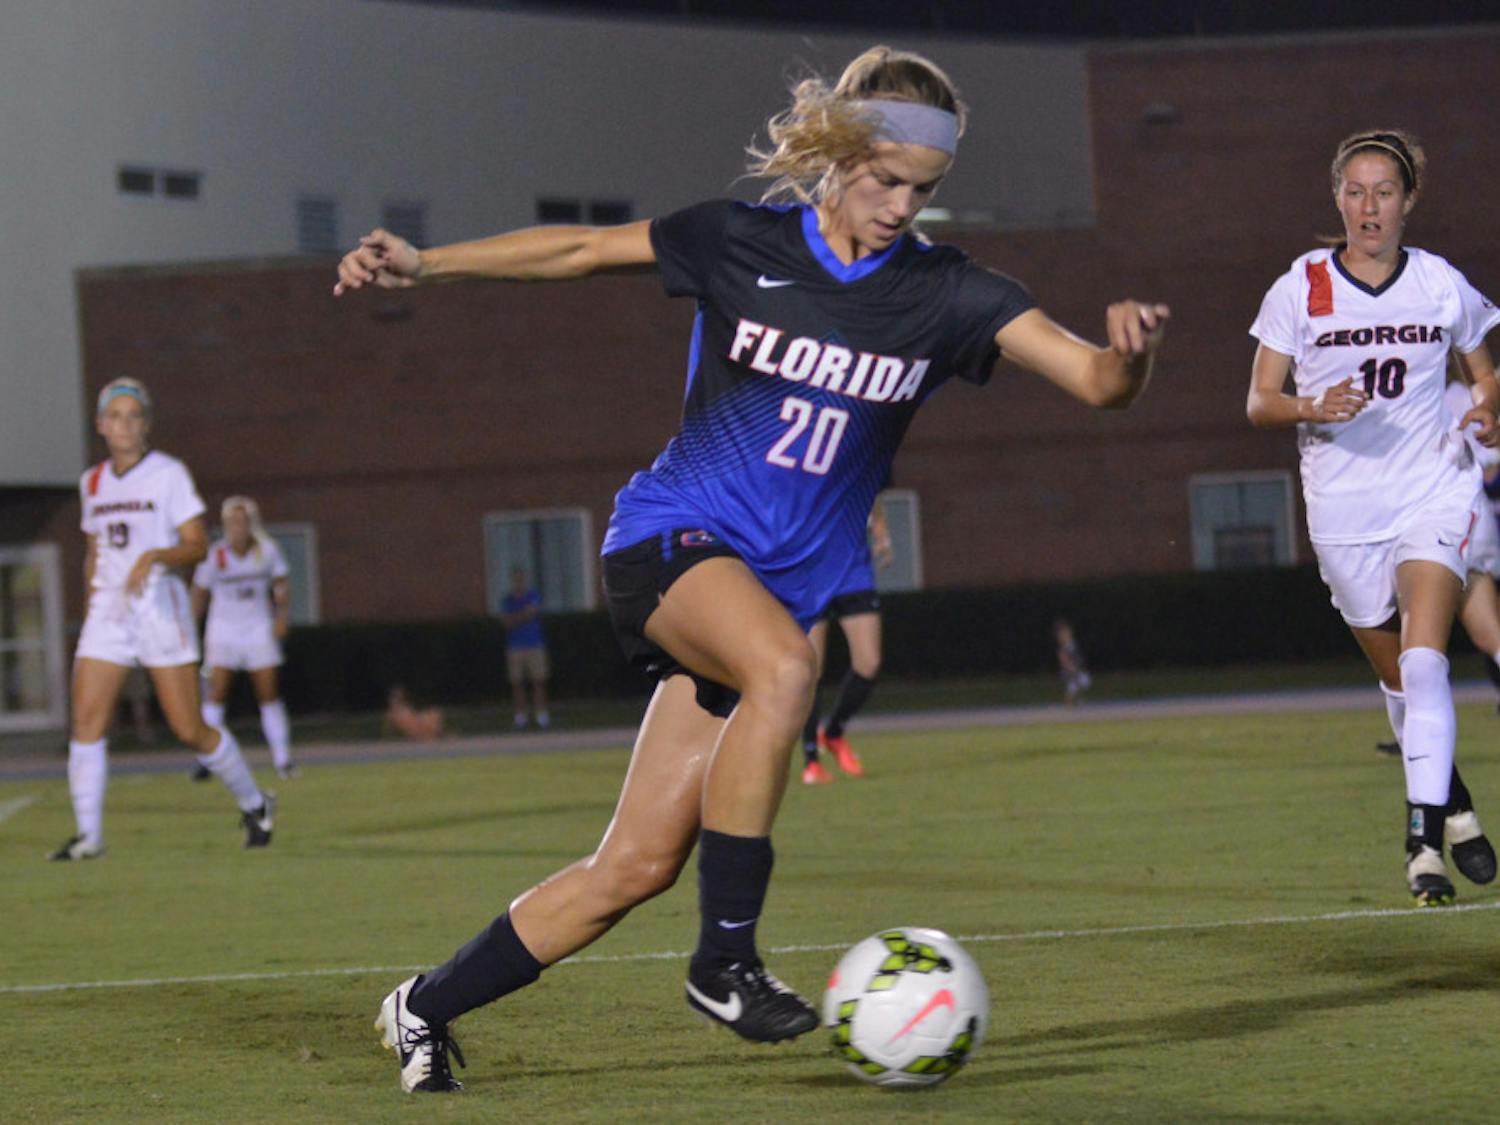 Christen Westphal dribbles the ball during Florida's 2-1 win against Georgia on Sept. 26 at James G. Pressly Stadium.